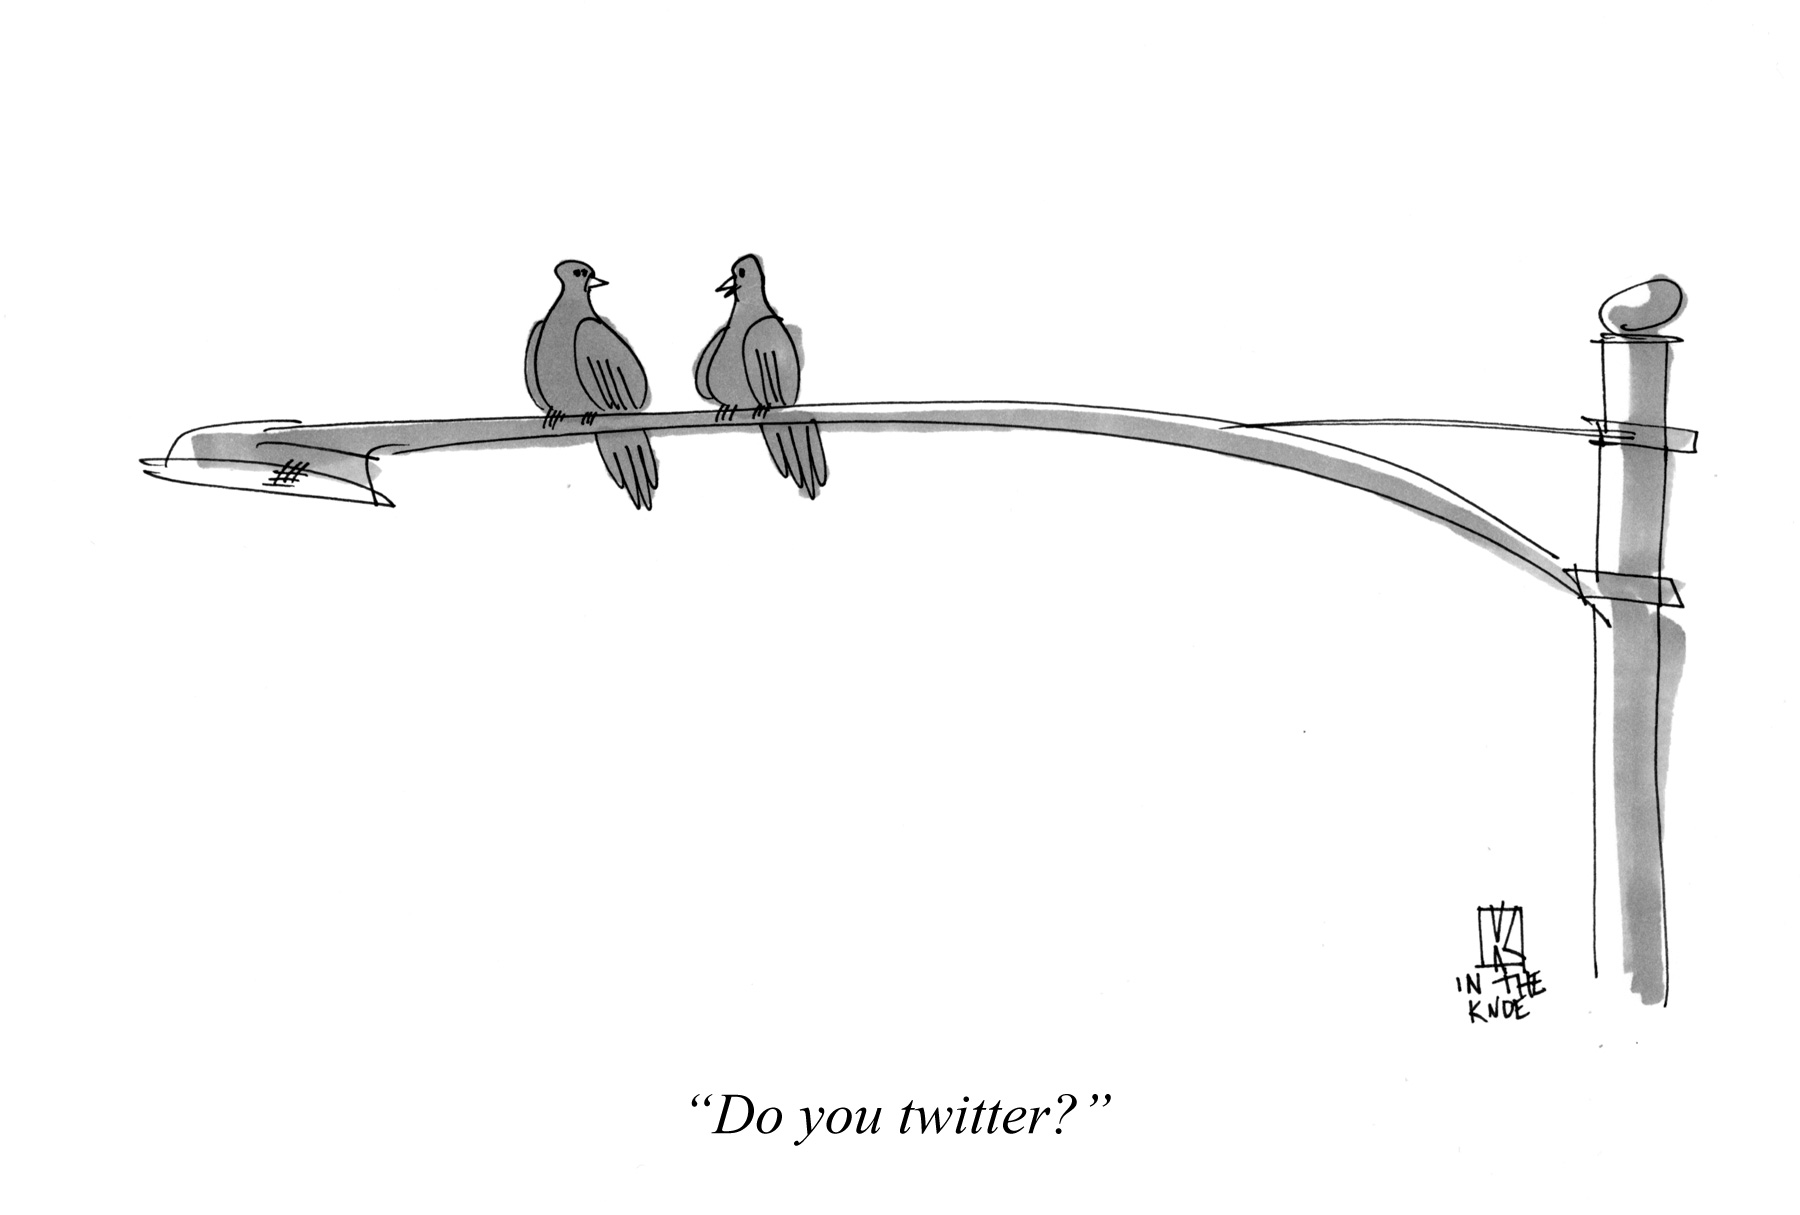 Do you twitter?